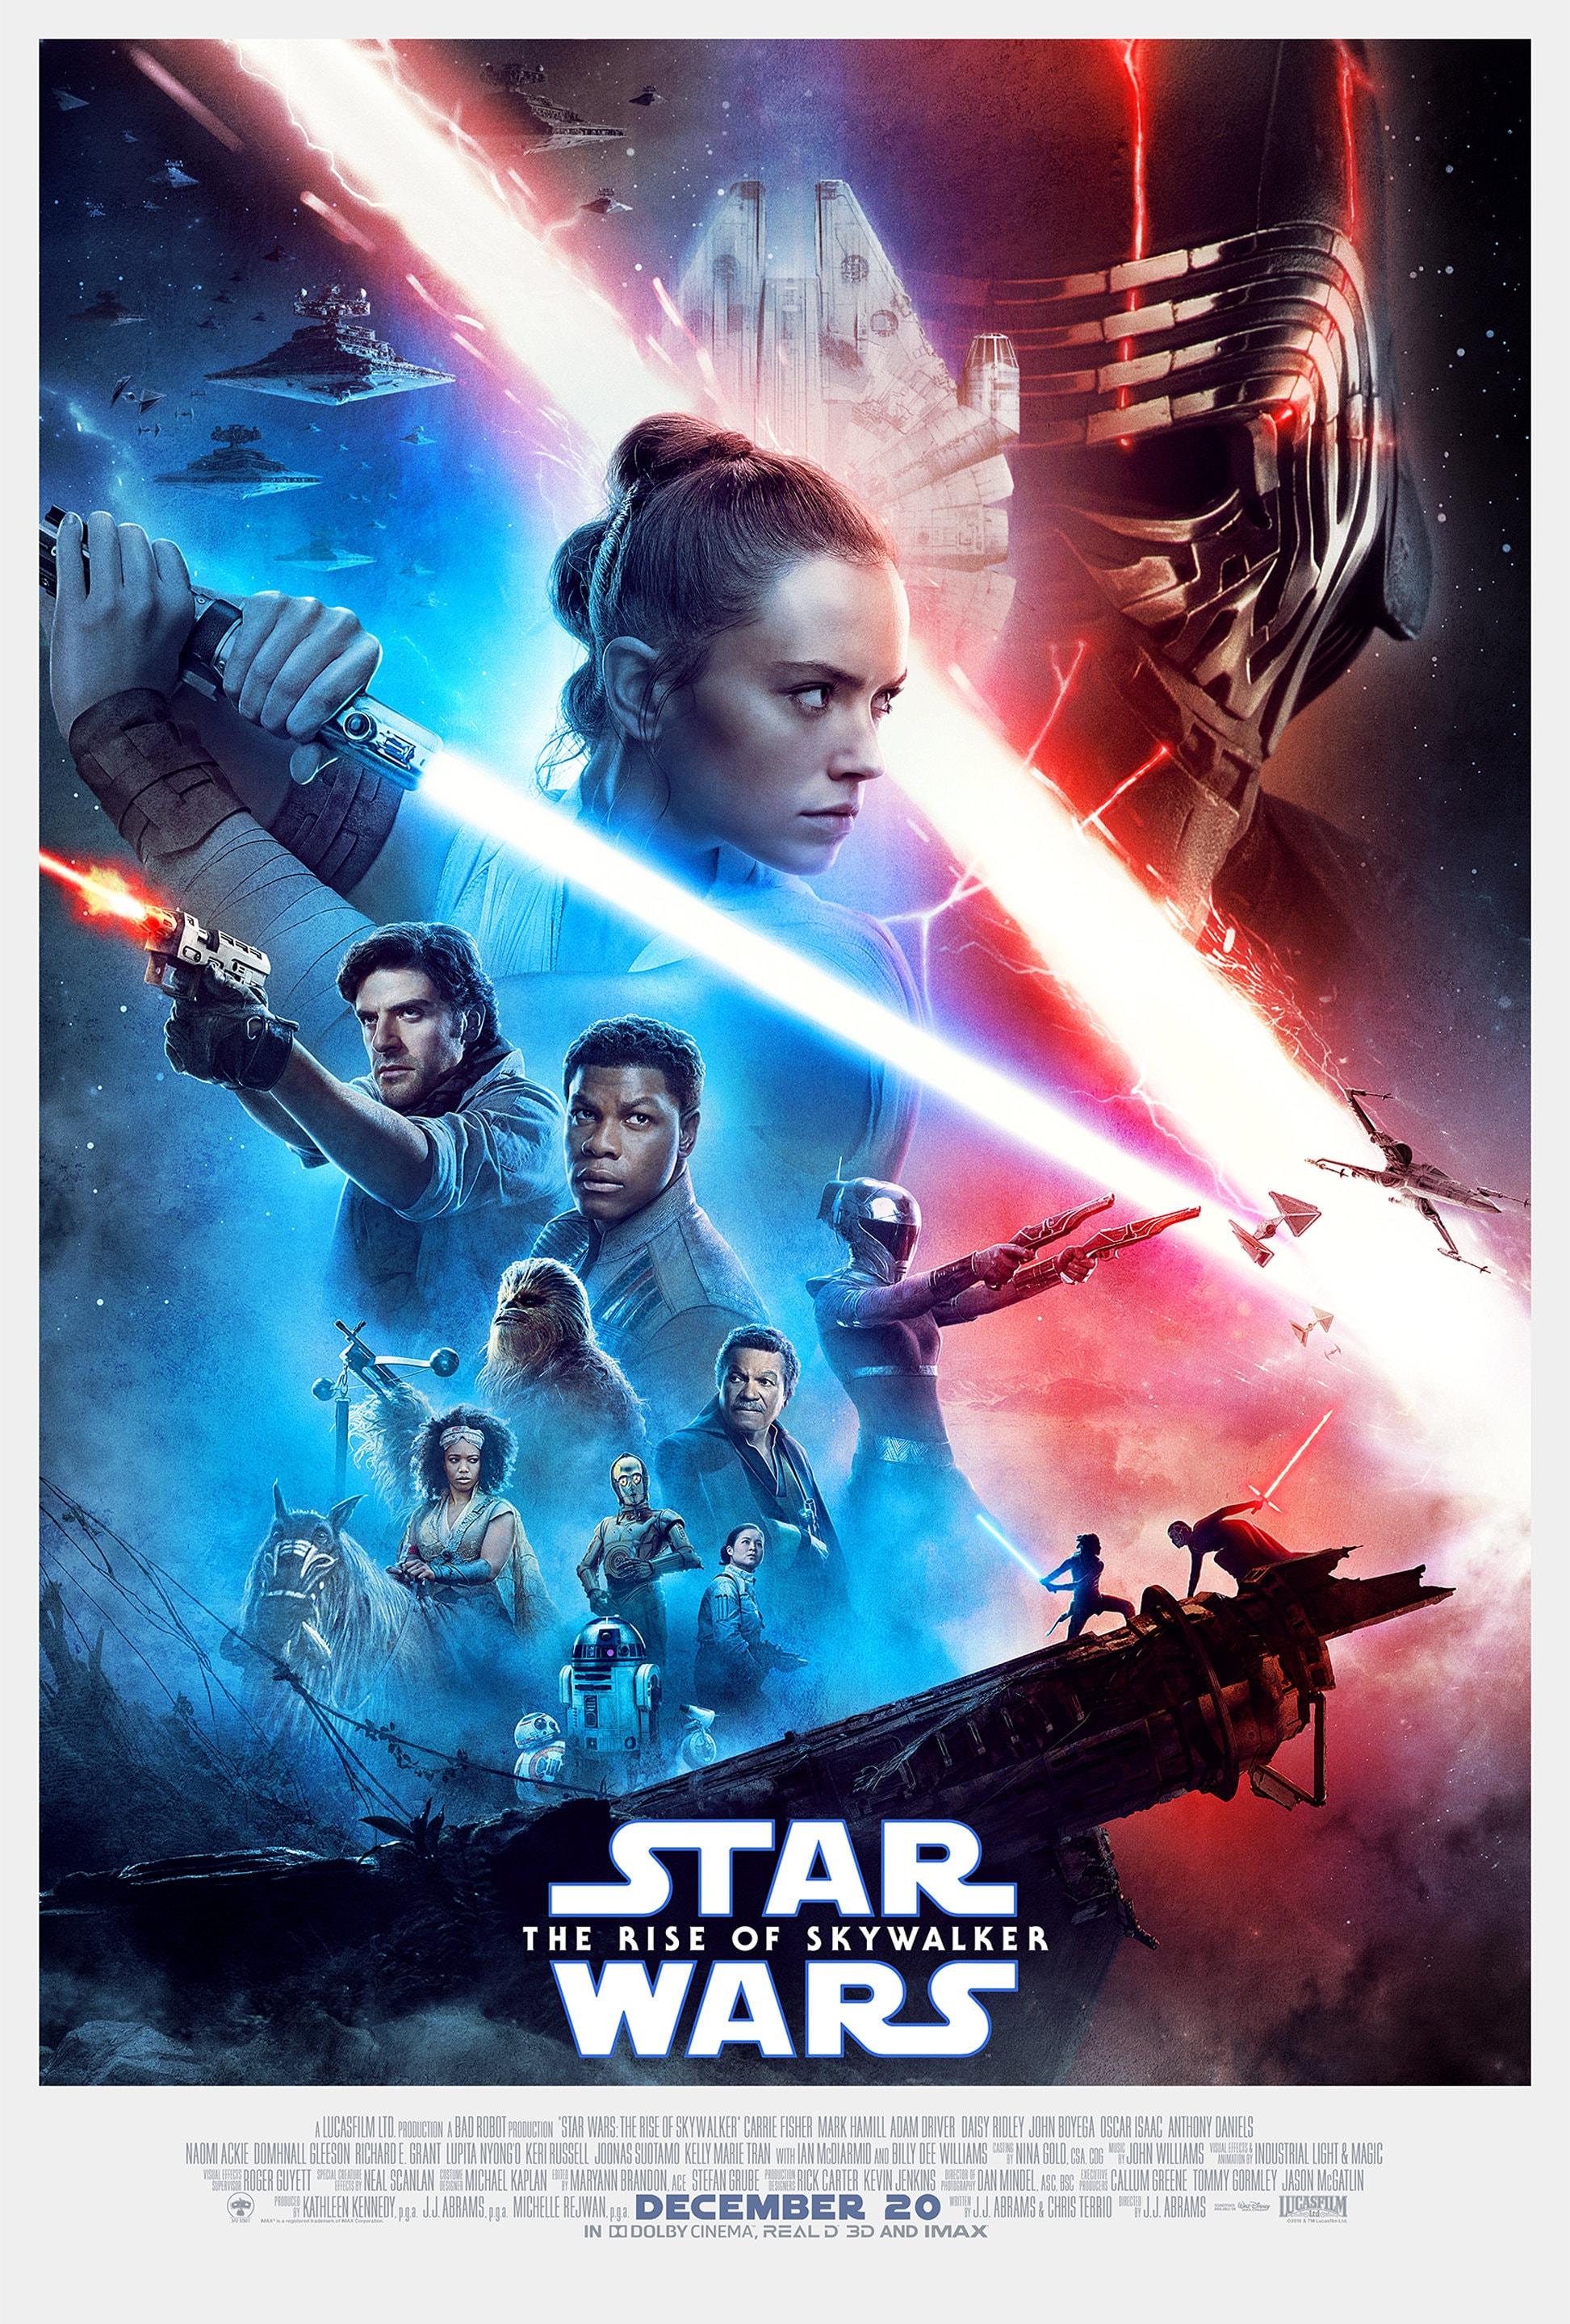 Buy Star Wars the Rise of Skywalker Movie Poster High Quality Glossy  Limited Wall Art Print Photo Sizes 8x10 11x17 16x20 22x28 24x36 27x40  Online in India 